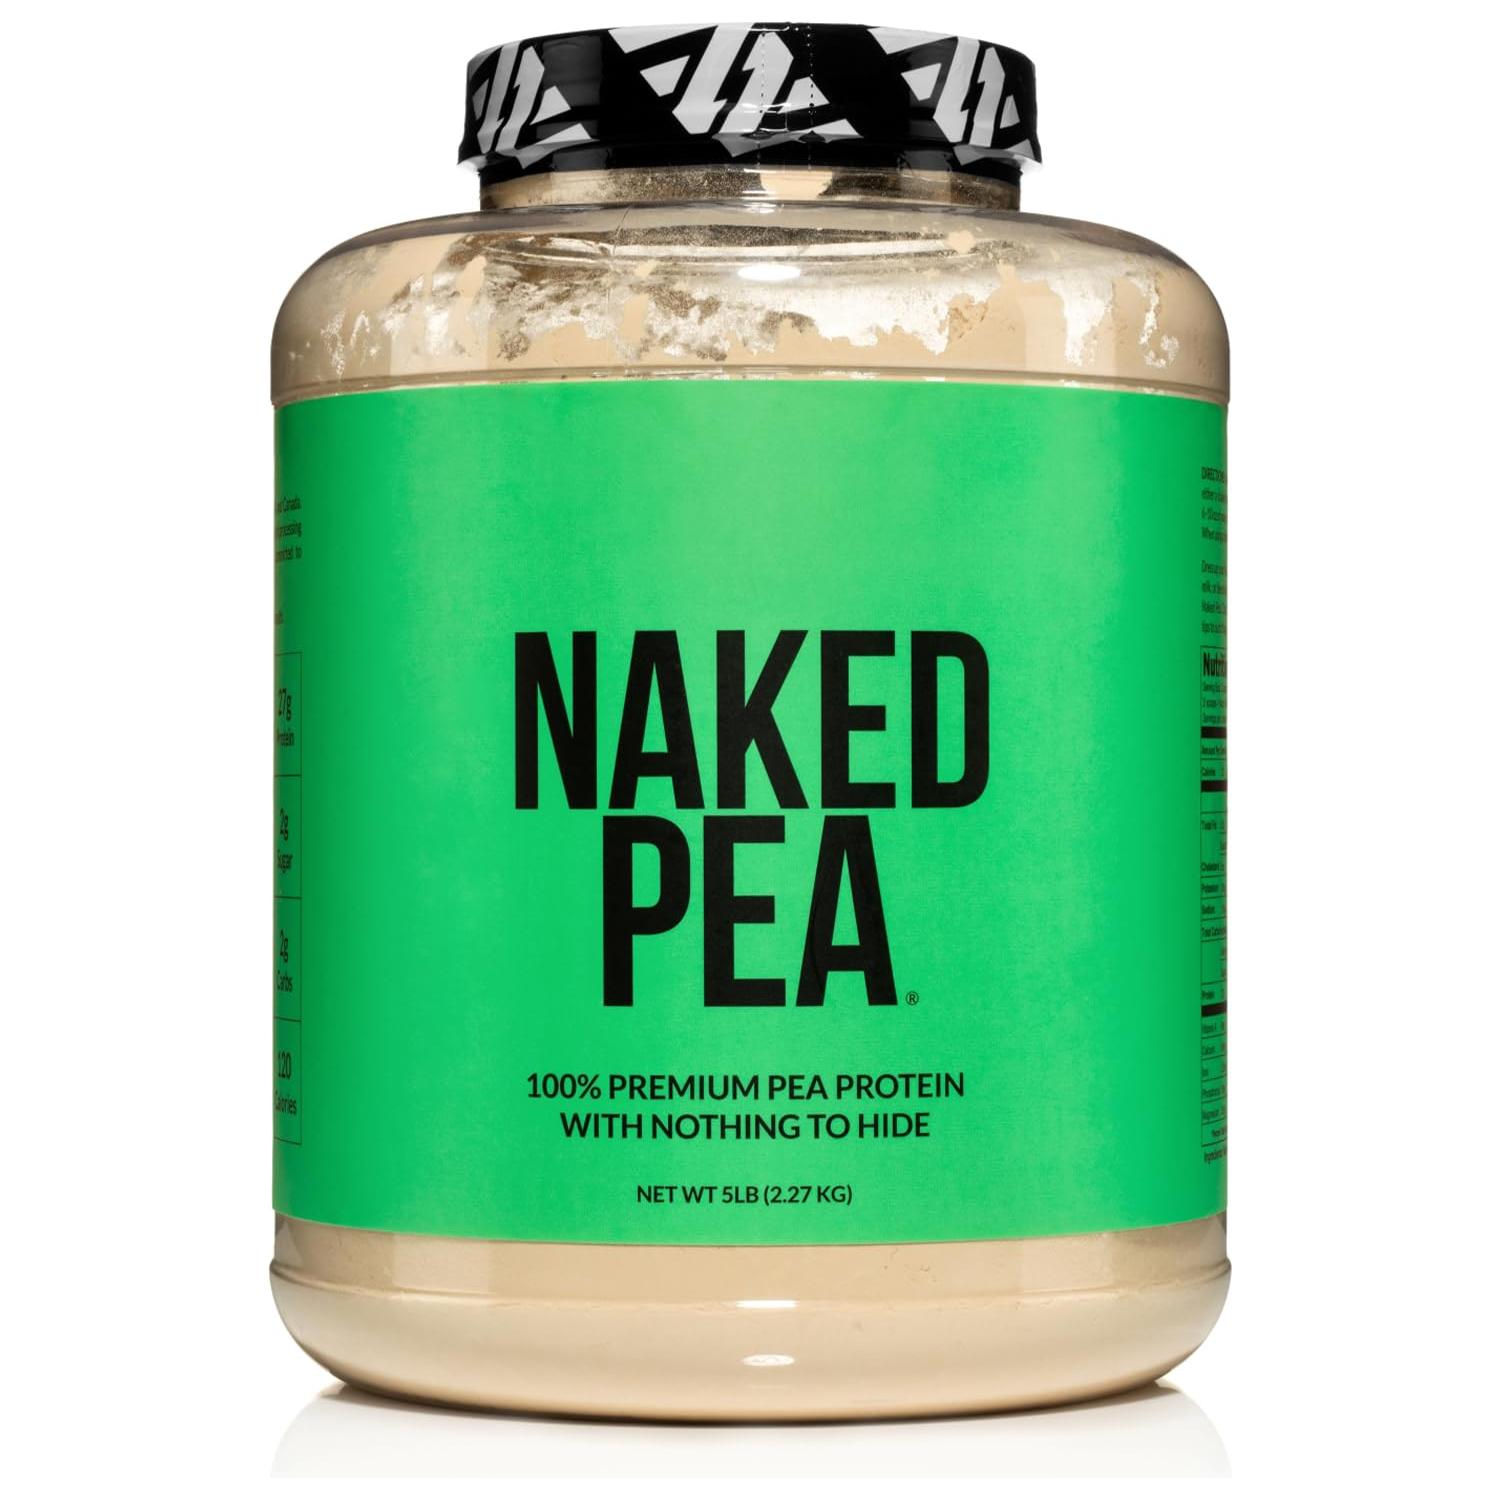 NAKED nutrition 5LB 100% Pea Protein Powder from North American Farms - Unflavored Vegan Pea Protein Isolate - Plant Protein Powder, Easy to Digest - Speeds Muscle Recovery